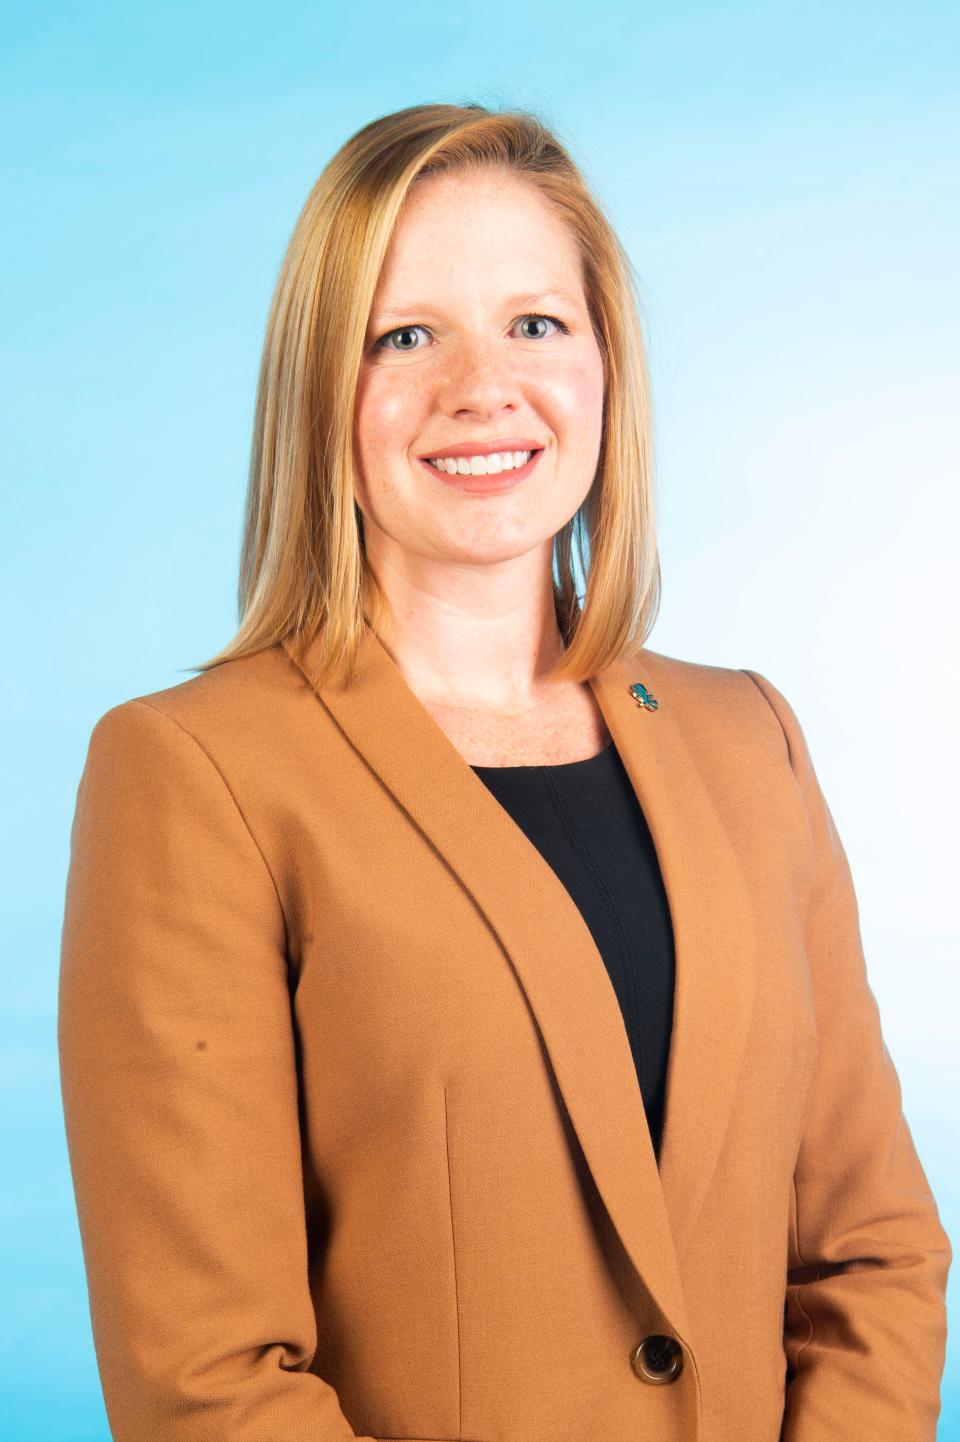 40 Under 40 Class of 2022 member N. Dianne Bull Ezell, research and development engineer, Oak Ridge National Laboratory